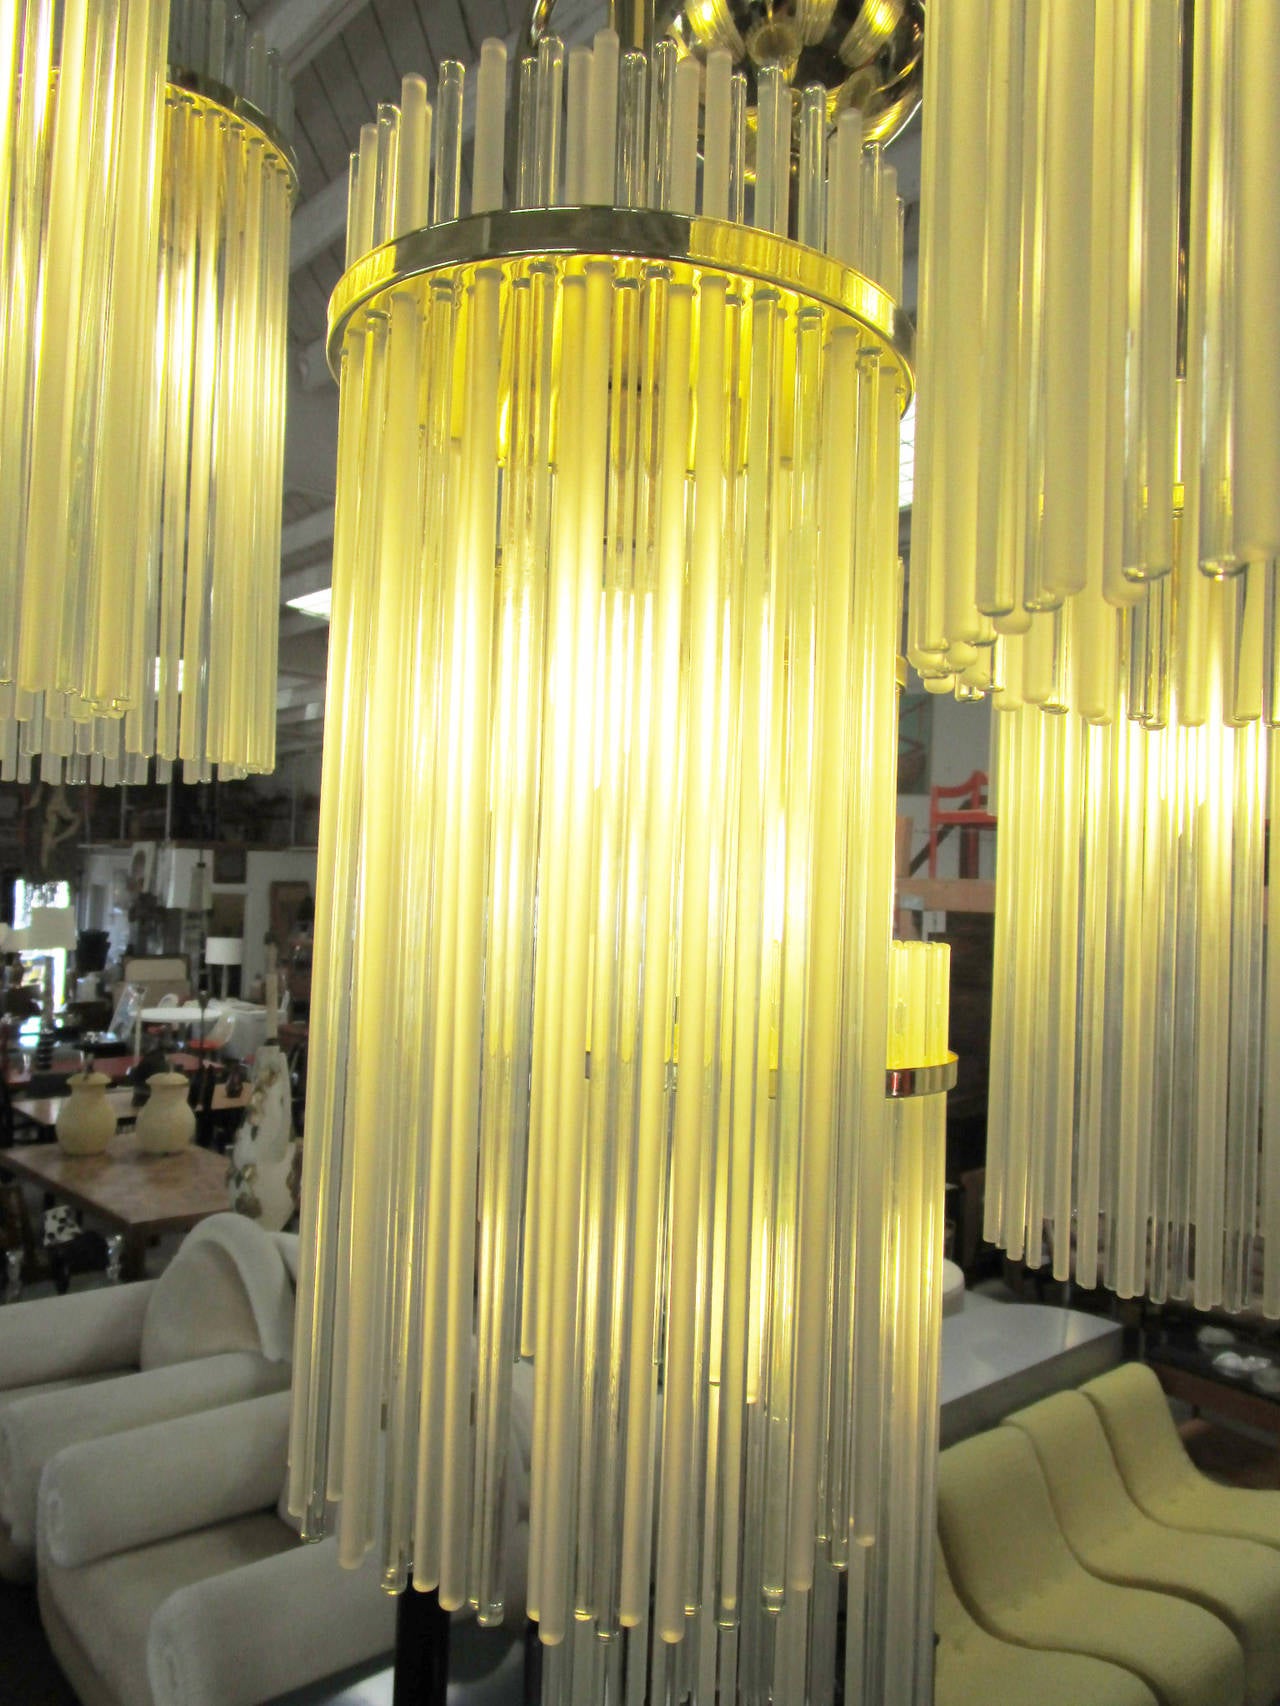 This glamorous chandelier is made up of ten brass arms which arc gracefully into cylindrical fixtures composed of individual rods of hand blown glass. The impressive artistry in glass as well as the impact of chandelier's grand scale makes this an